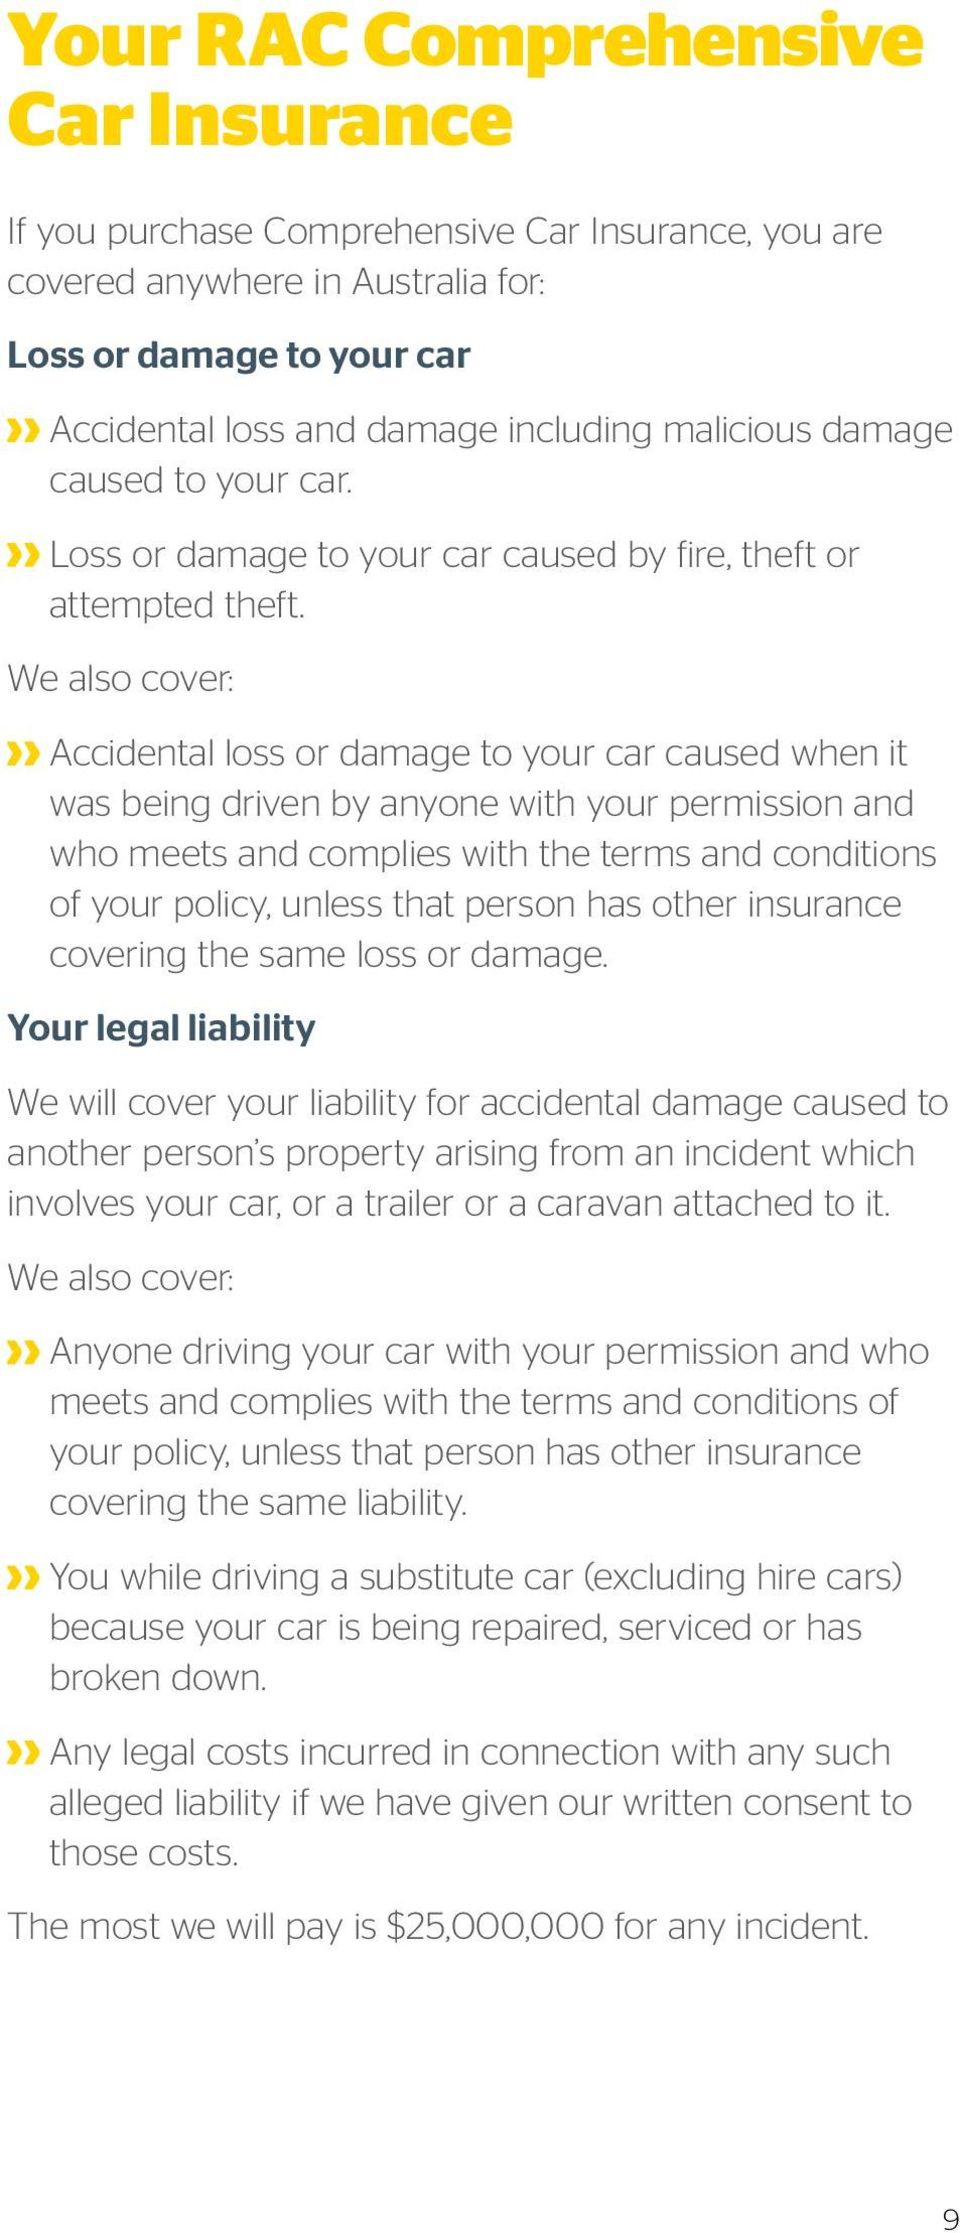 We also cover: Accidental loss or damage to your car caused when it was being driven by anyone with your permission and who meets and complies with the terms and conditions of your policy, unless